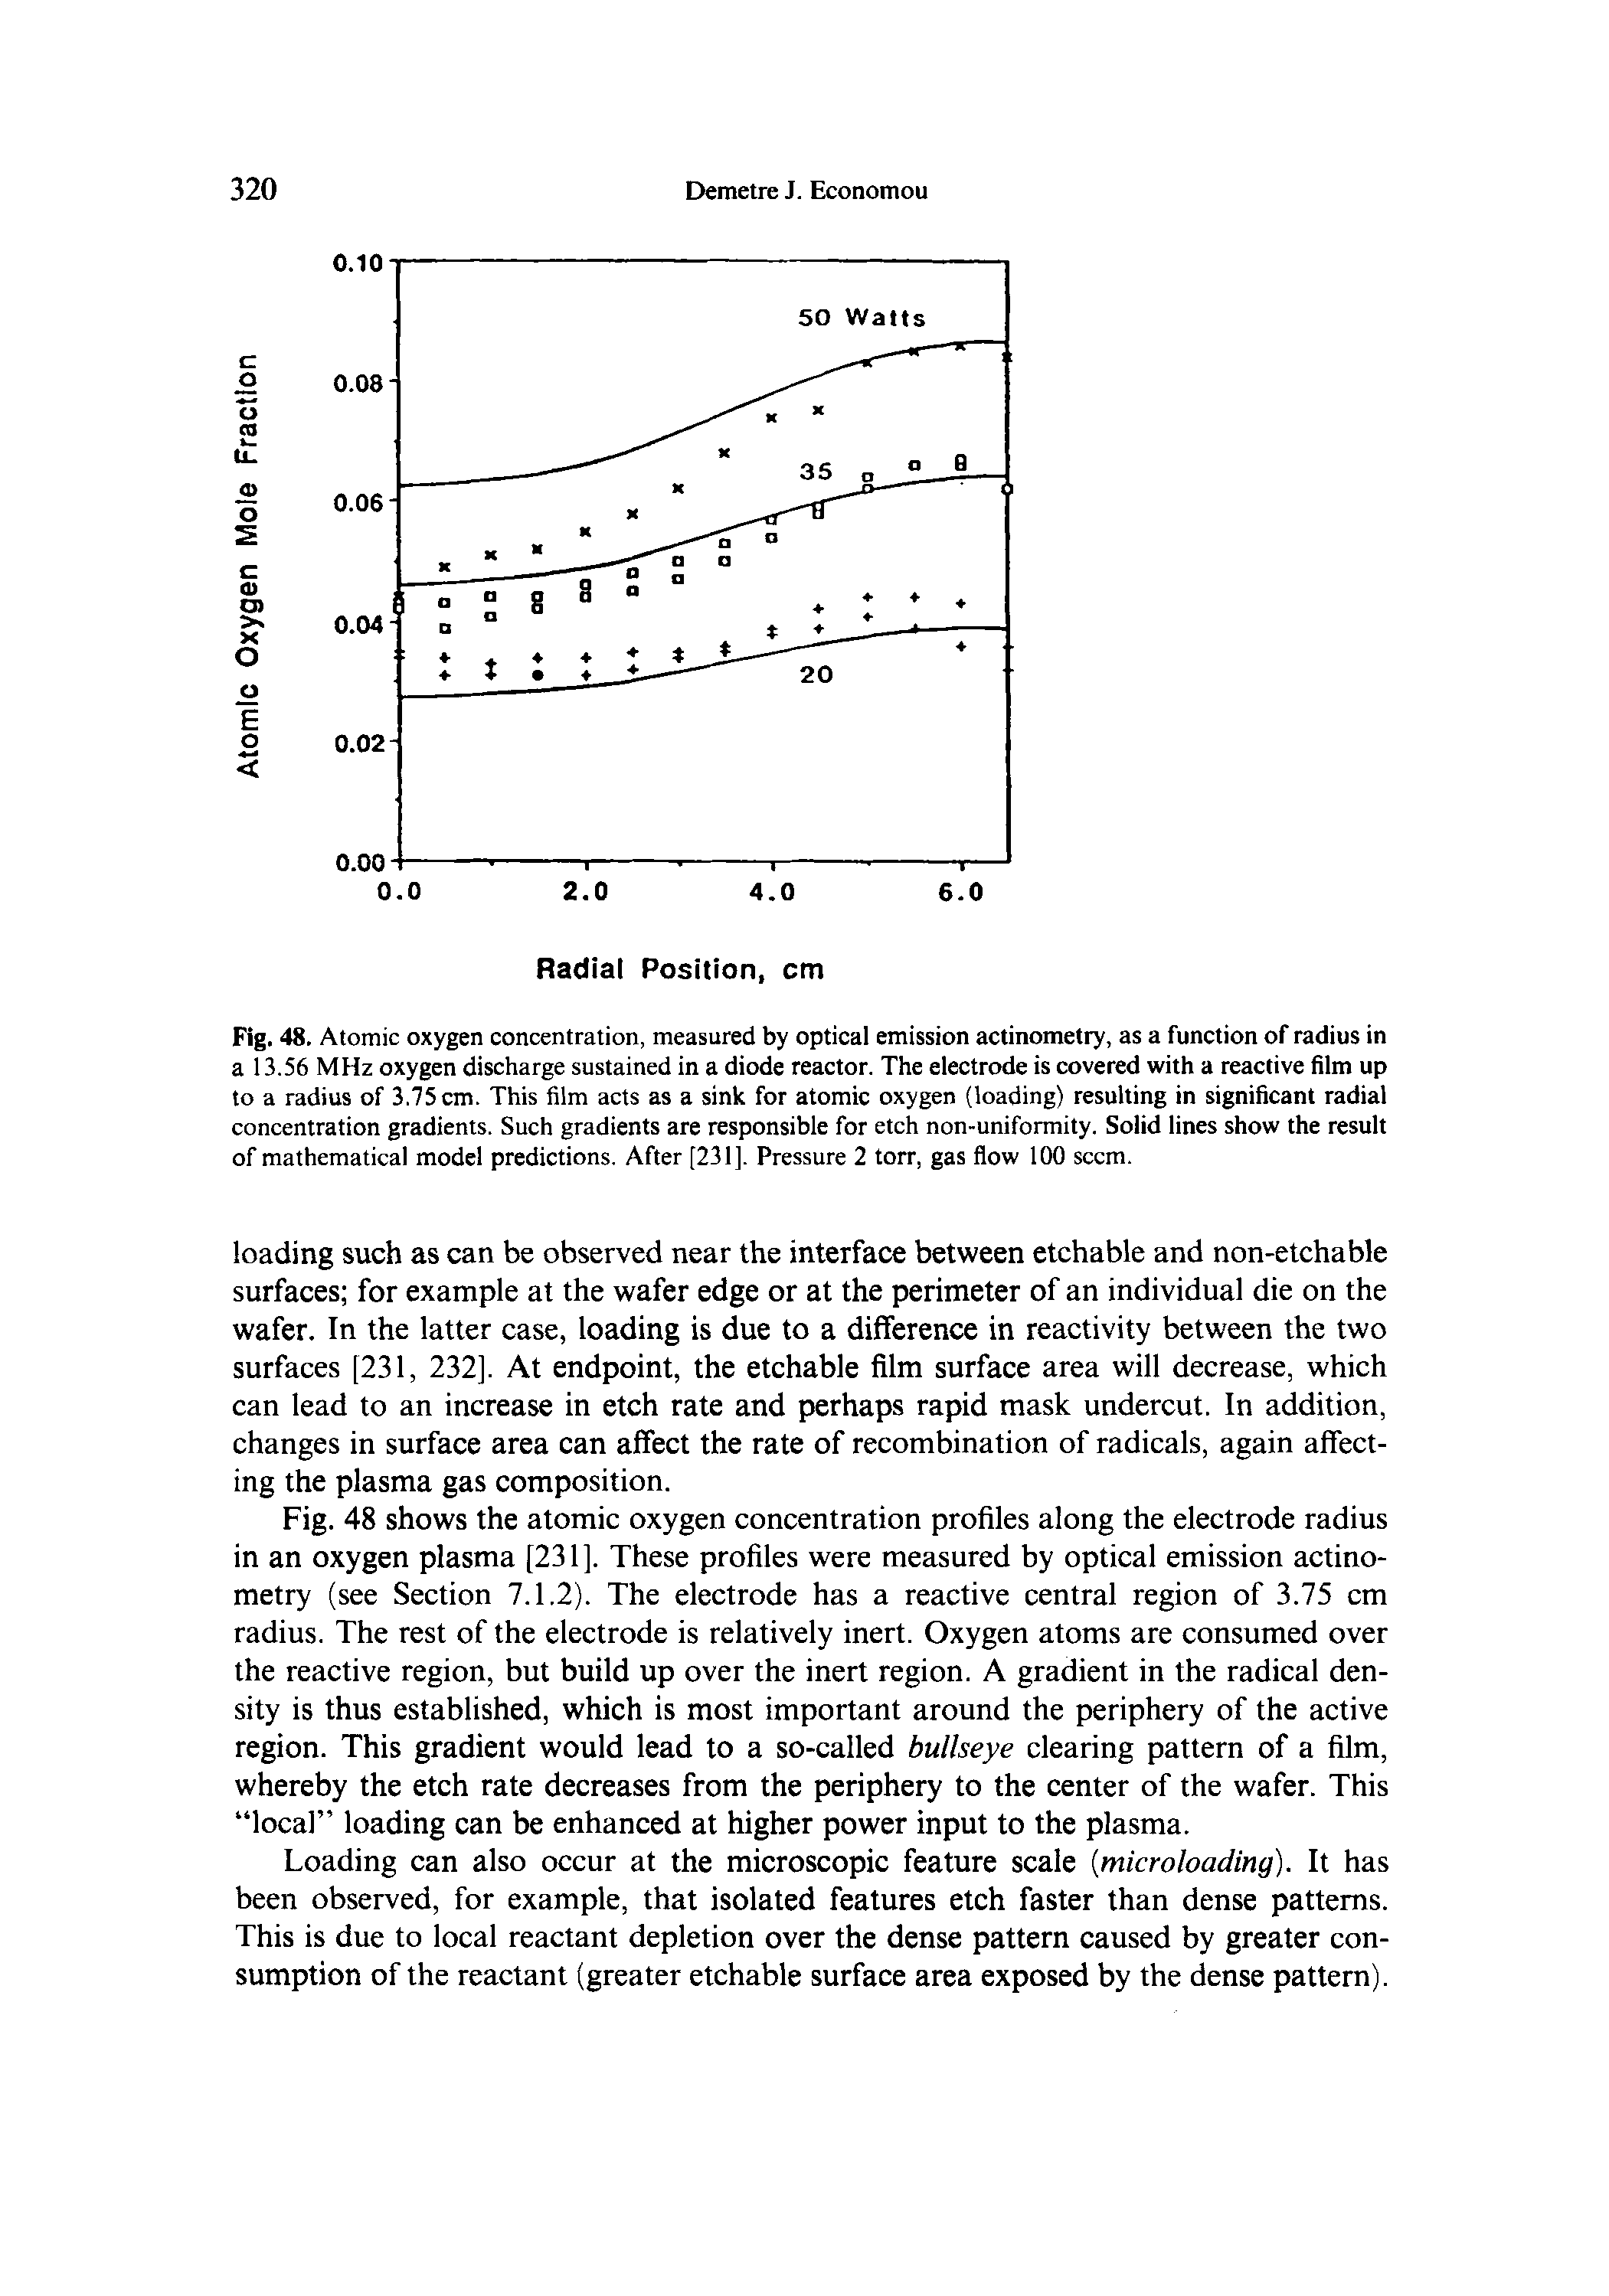 Fig. 48. Atomic oxygen concentration, measured by optical emission actinometry, as a function of radius in a 13.56 MHz oxygen discharge sustained in a diode reactor. The electrode is covered with a reactive film up to a radius of 3.75 cm. This film acts as a sink for atomic oxygen (loading) resulting in significant radial concentration gradients. Such gradients are responsible for etch non-uniformity. Solid lines show the result of mathematical model predictions. After [231]. Pressure 2 torr, gas flow 100 seem.